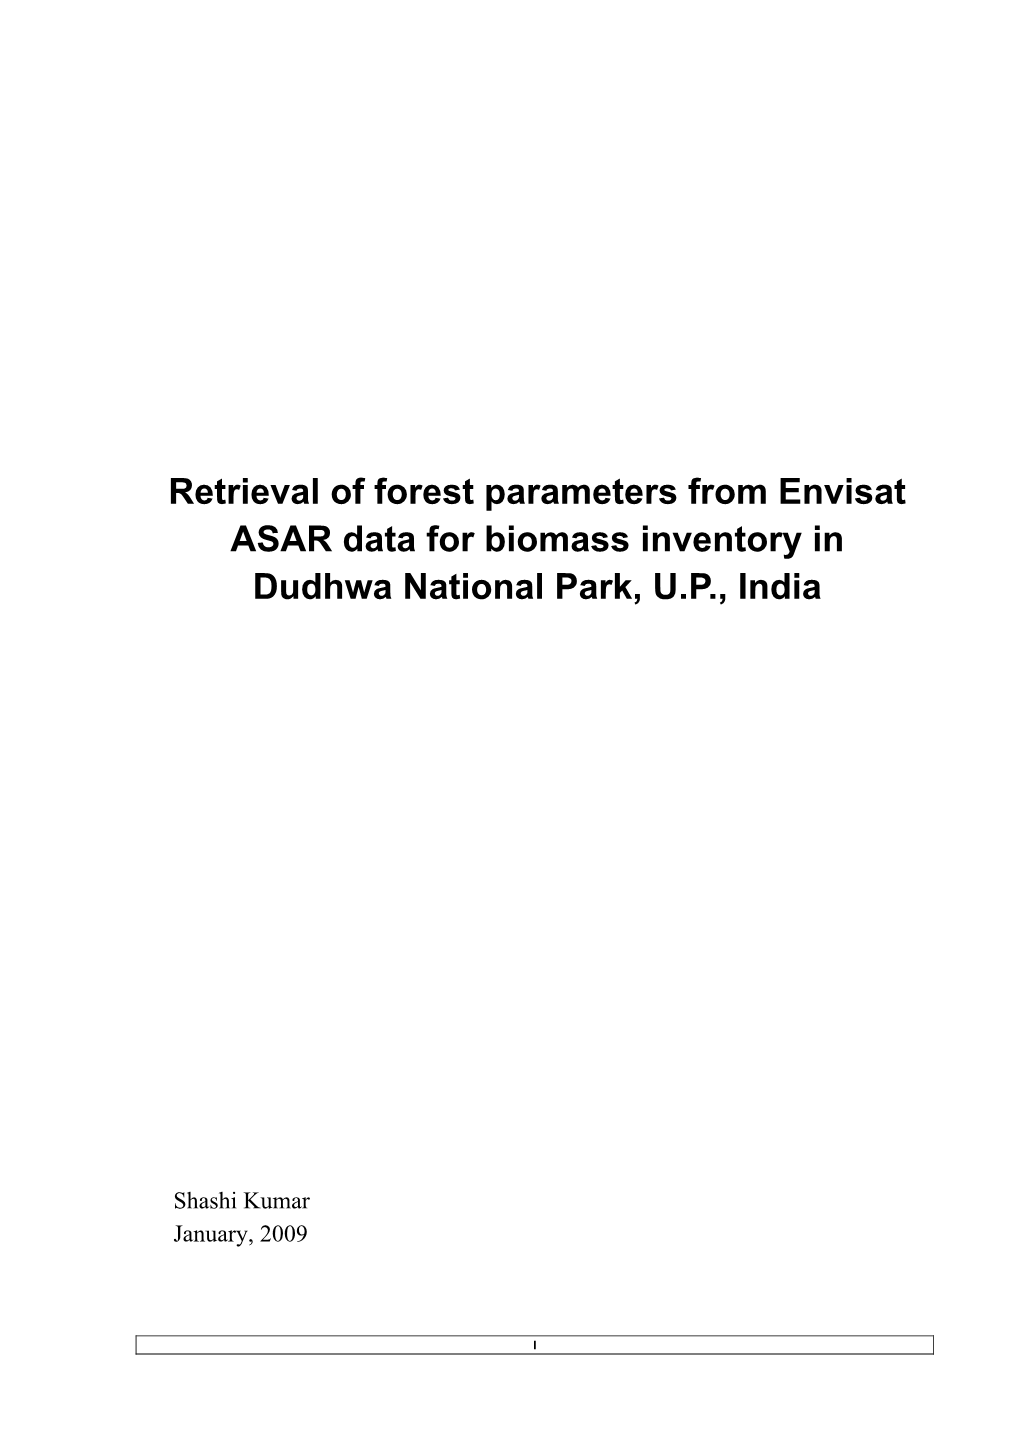 Retrieval of Forest Parameters from Envisat ASAR Data for Biomass Inventory in Dudhwa National Park, U.P., India